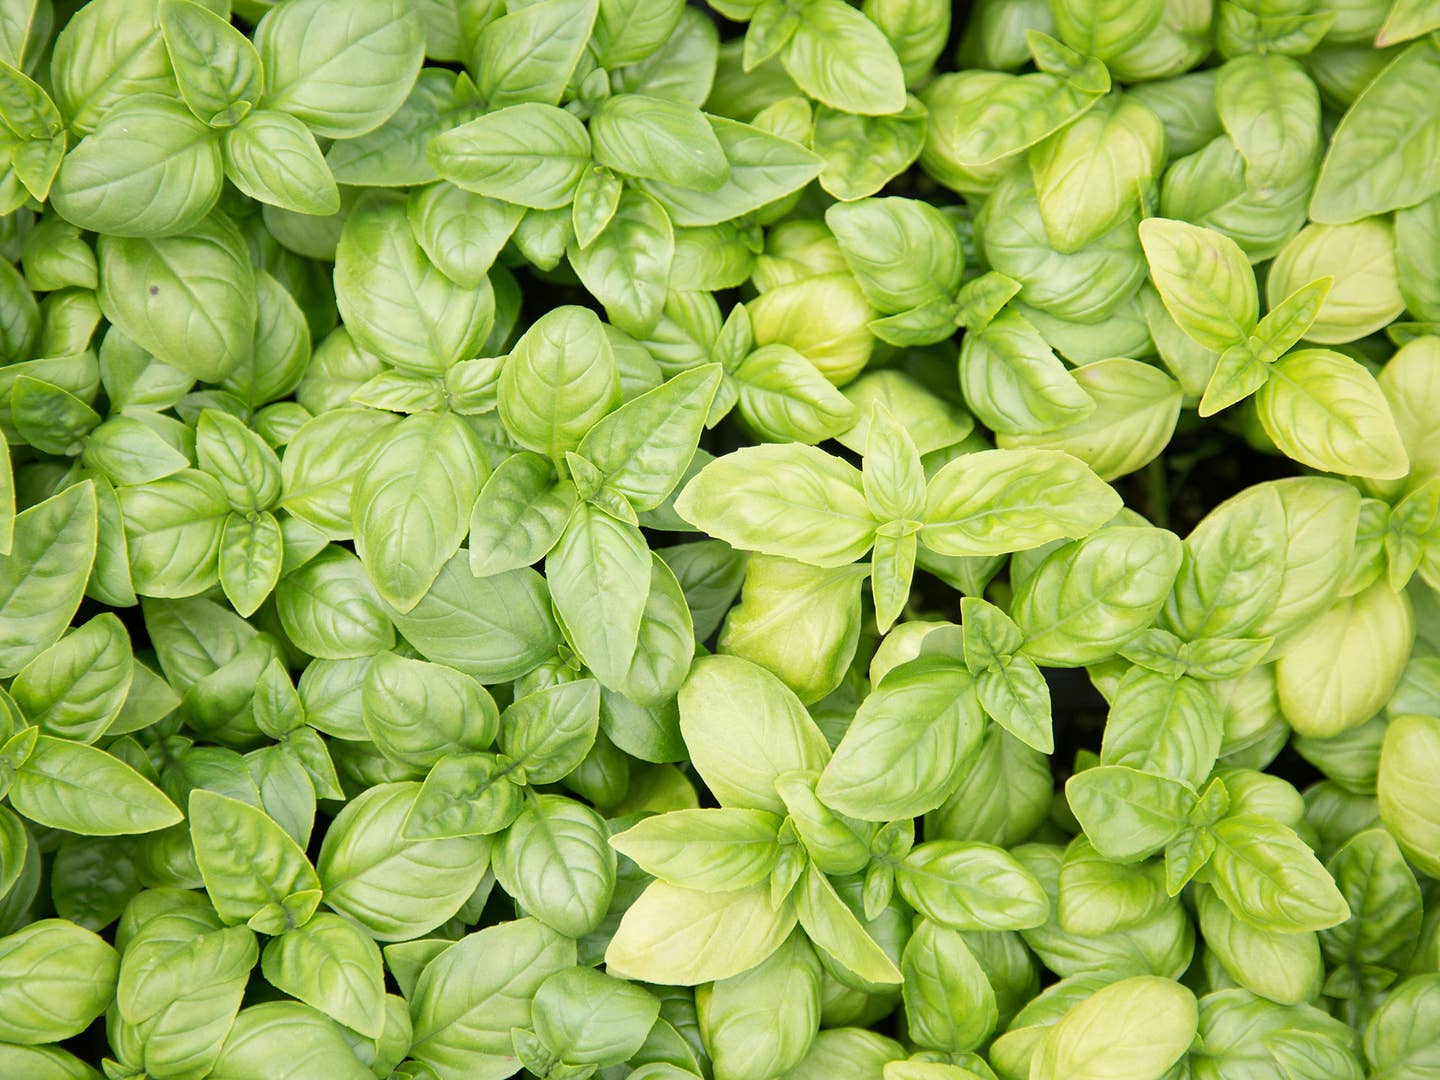 Building A Garden: Why Growing Herbs is Easy